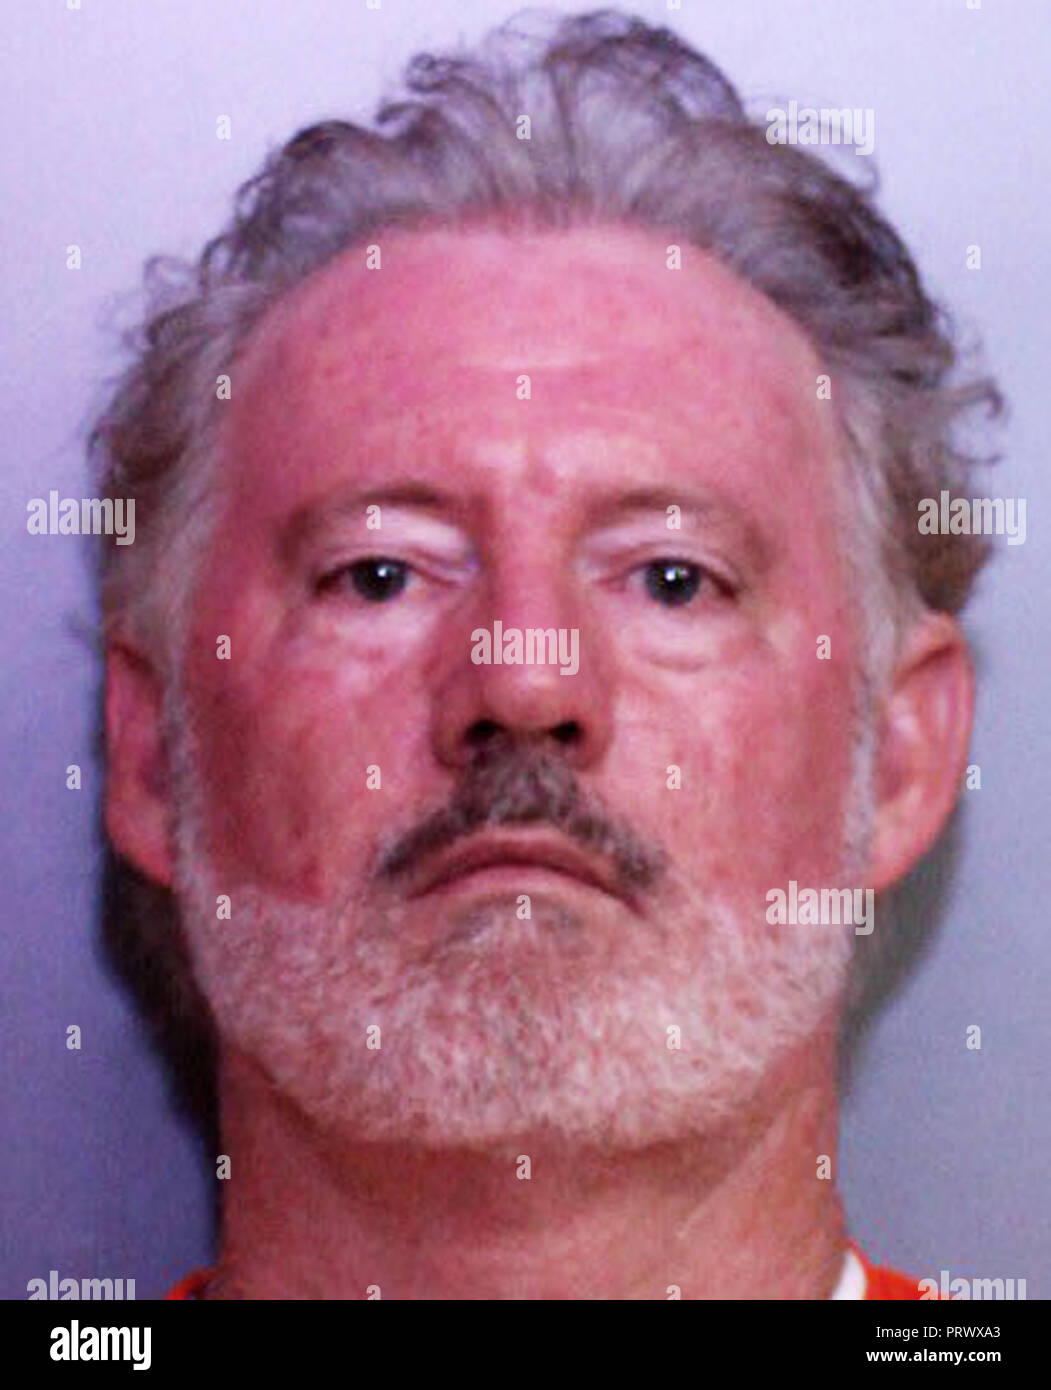 October 3, 2018 - Winter Haven, Florida, United States - James Royal Patrick, Jr., 53, shown in this police booking photo, was arrested by the Polk County, Florida Sheriff's Office on October 3, 2018 for allegedly threatening to shoot members of Congress if they voted against Supreme Court nominee Brett Kavanaugh. The threats were made by Patrick on September 22, 24, and 29 on his Facebook page. Patrick also allegedly threatened to shoot the families of Senators and any law enforcement officers who responded to his home. Firearms and ammunition were seized from Patrick's home pursuant to a sea Stock Photo